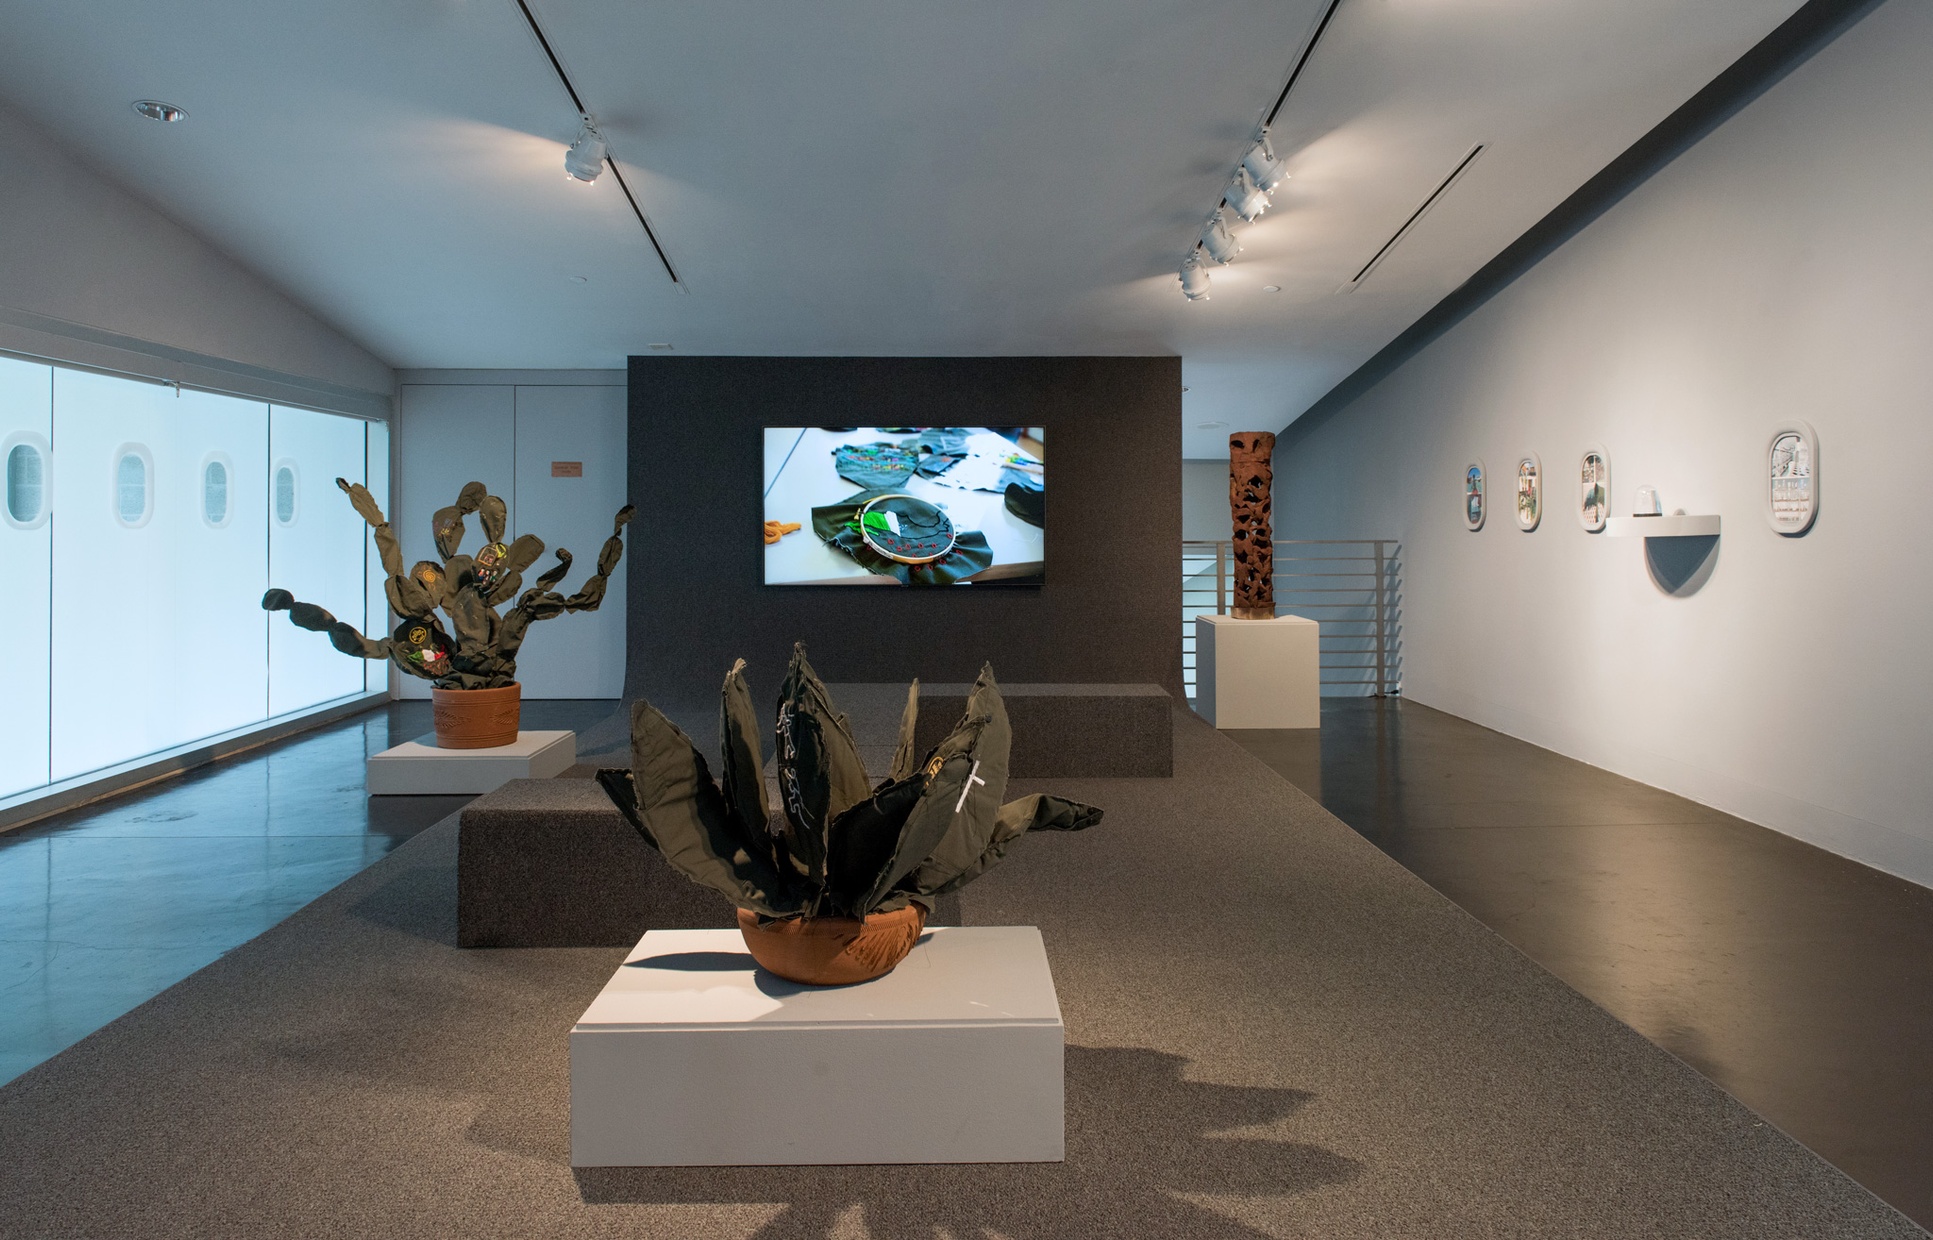 A room with a wall of windows on the left, soft cactus sculptures in the center with a television monitor playing video on the wall behind them, and art hanging on the wall on the right.